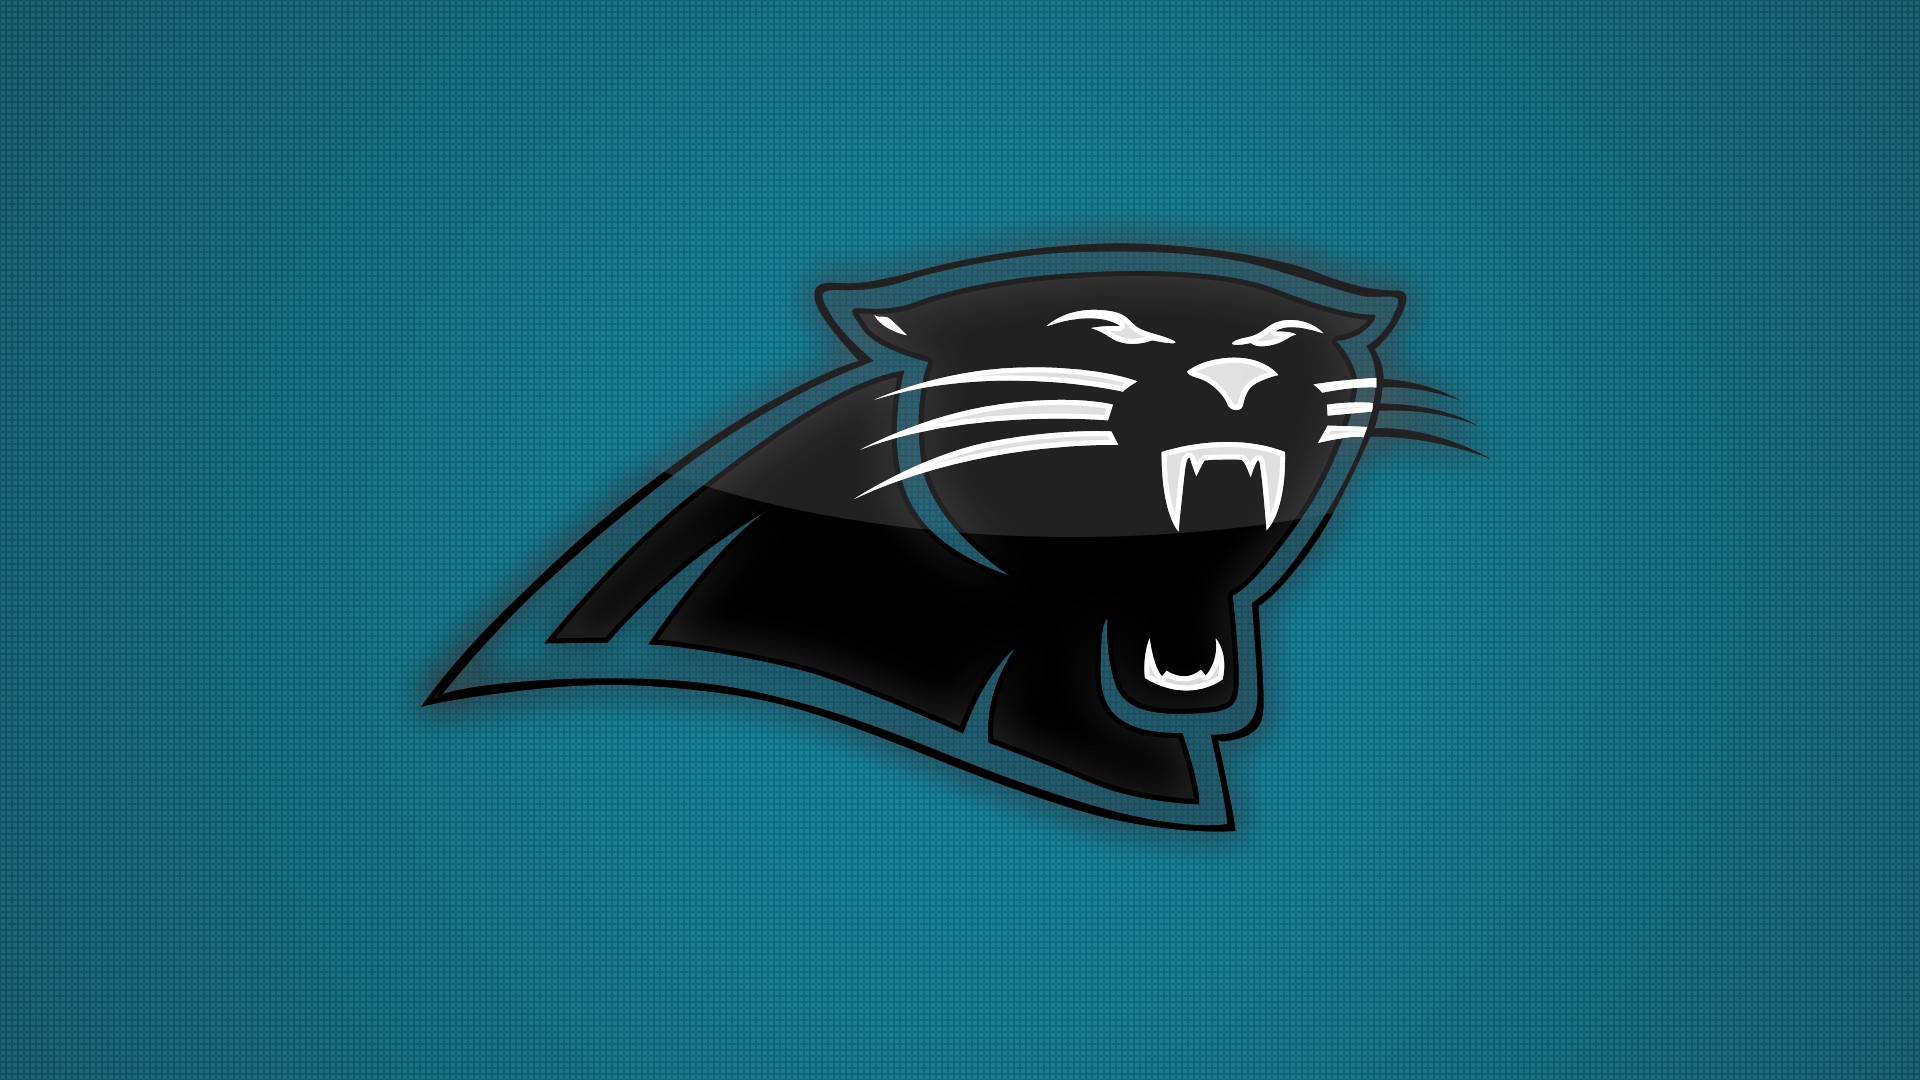 Windows Wallpaper Panthers with high-resolution 1920x1080 pixel. You can use this wallpaper for your Mac or Windows Desktop Background, iPhone, Android or Tablet and another Smartphone device